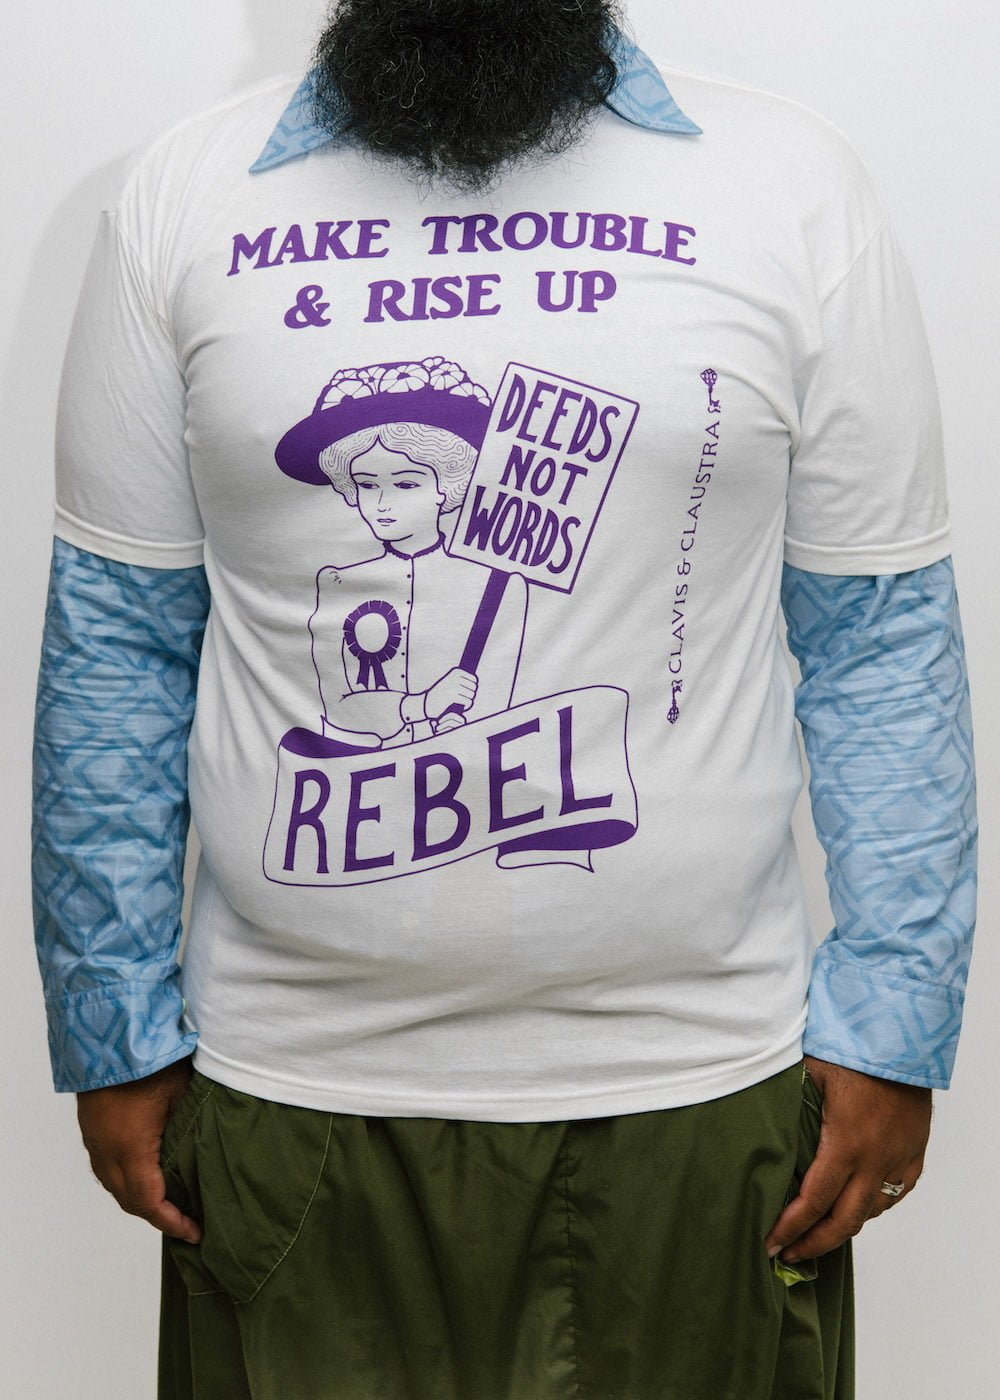 Make Trouble & Rise Up Suffragette shirt | Photography by Ellie Ramsden for Freedom Press